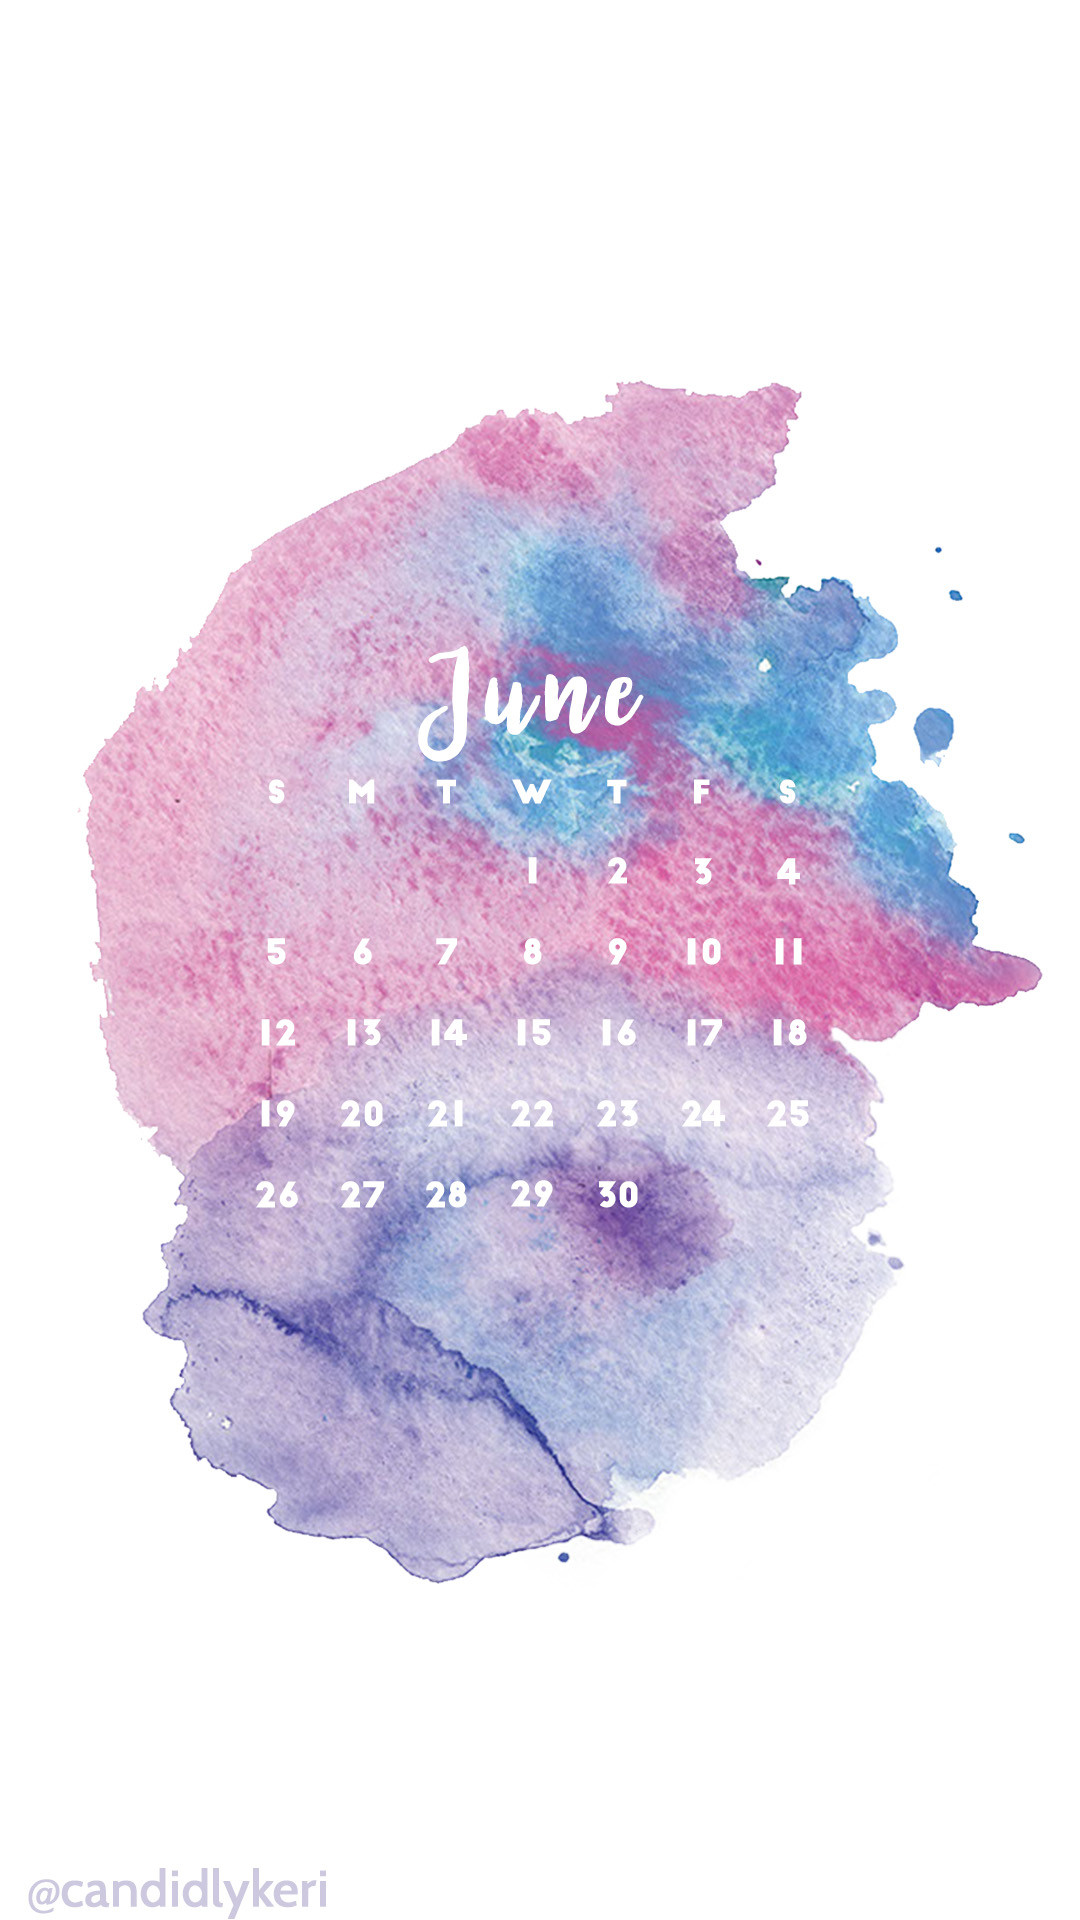 1080x1920 Blue purple pink watercolor June 2016 calendar wallpaper free download for  iPhone android or desktop background